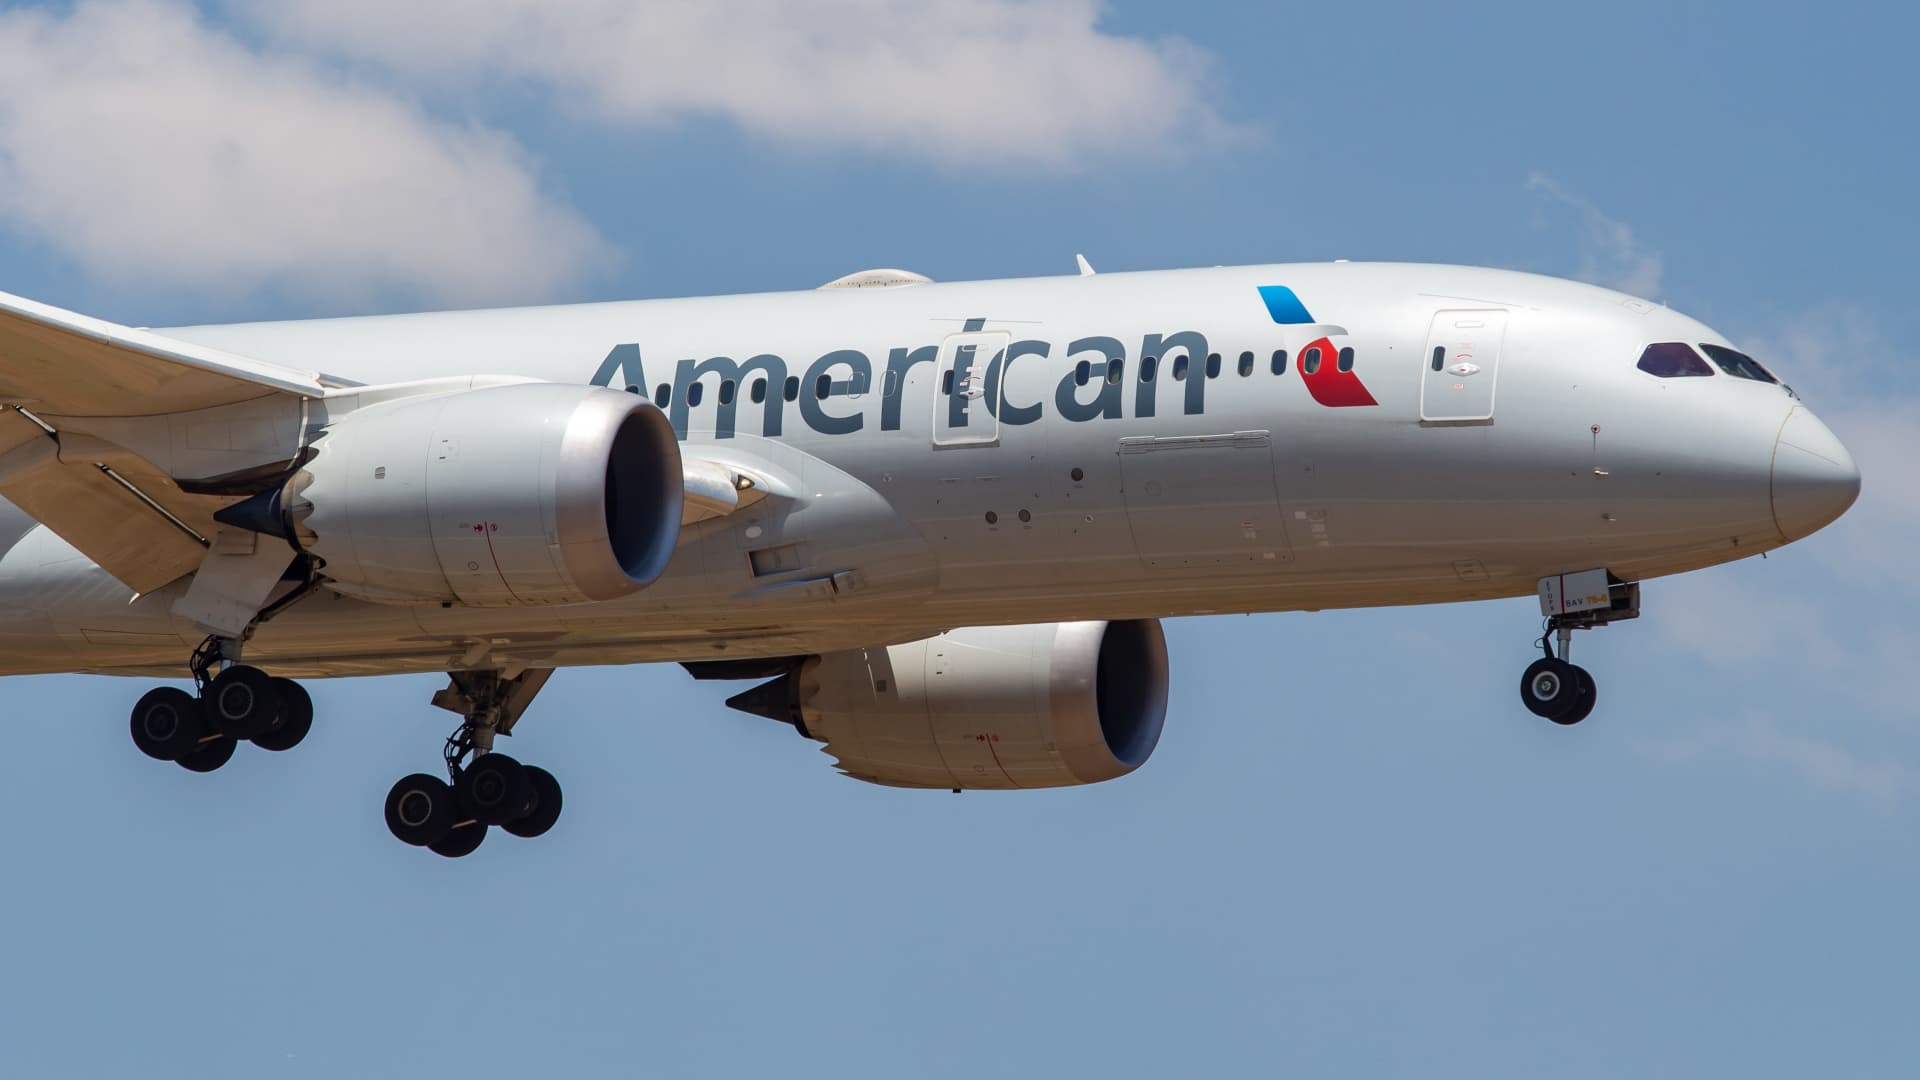 travel tuesday 2022 american airlines